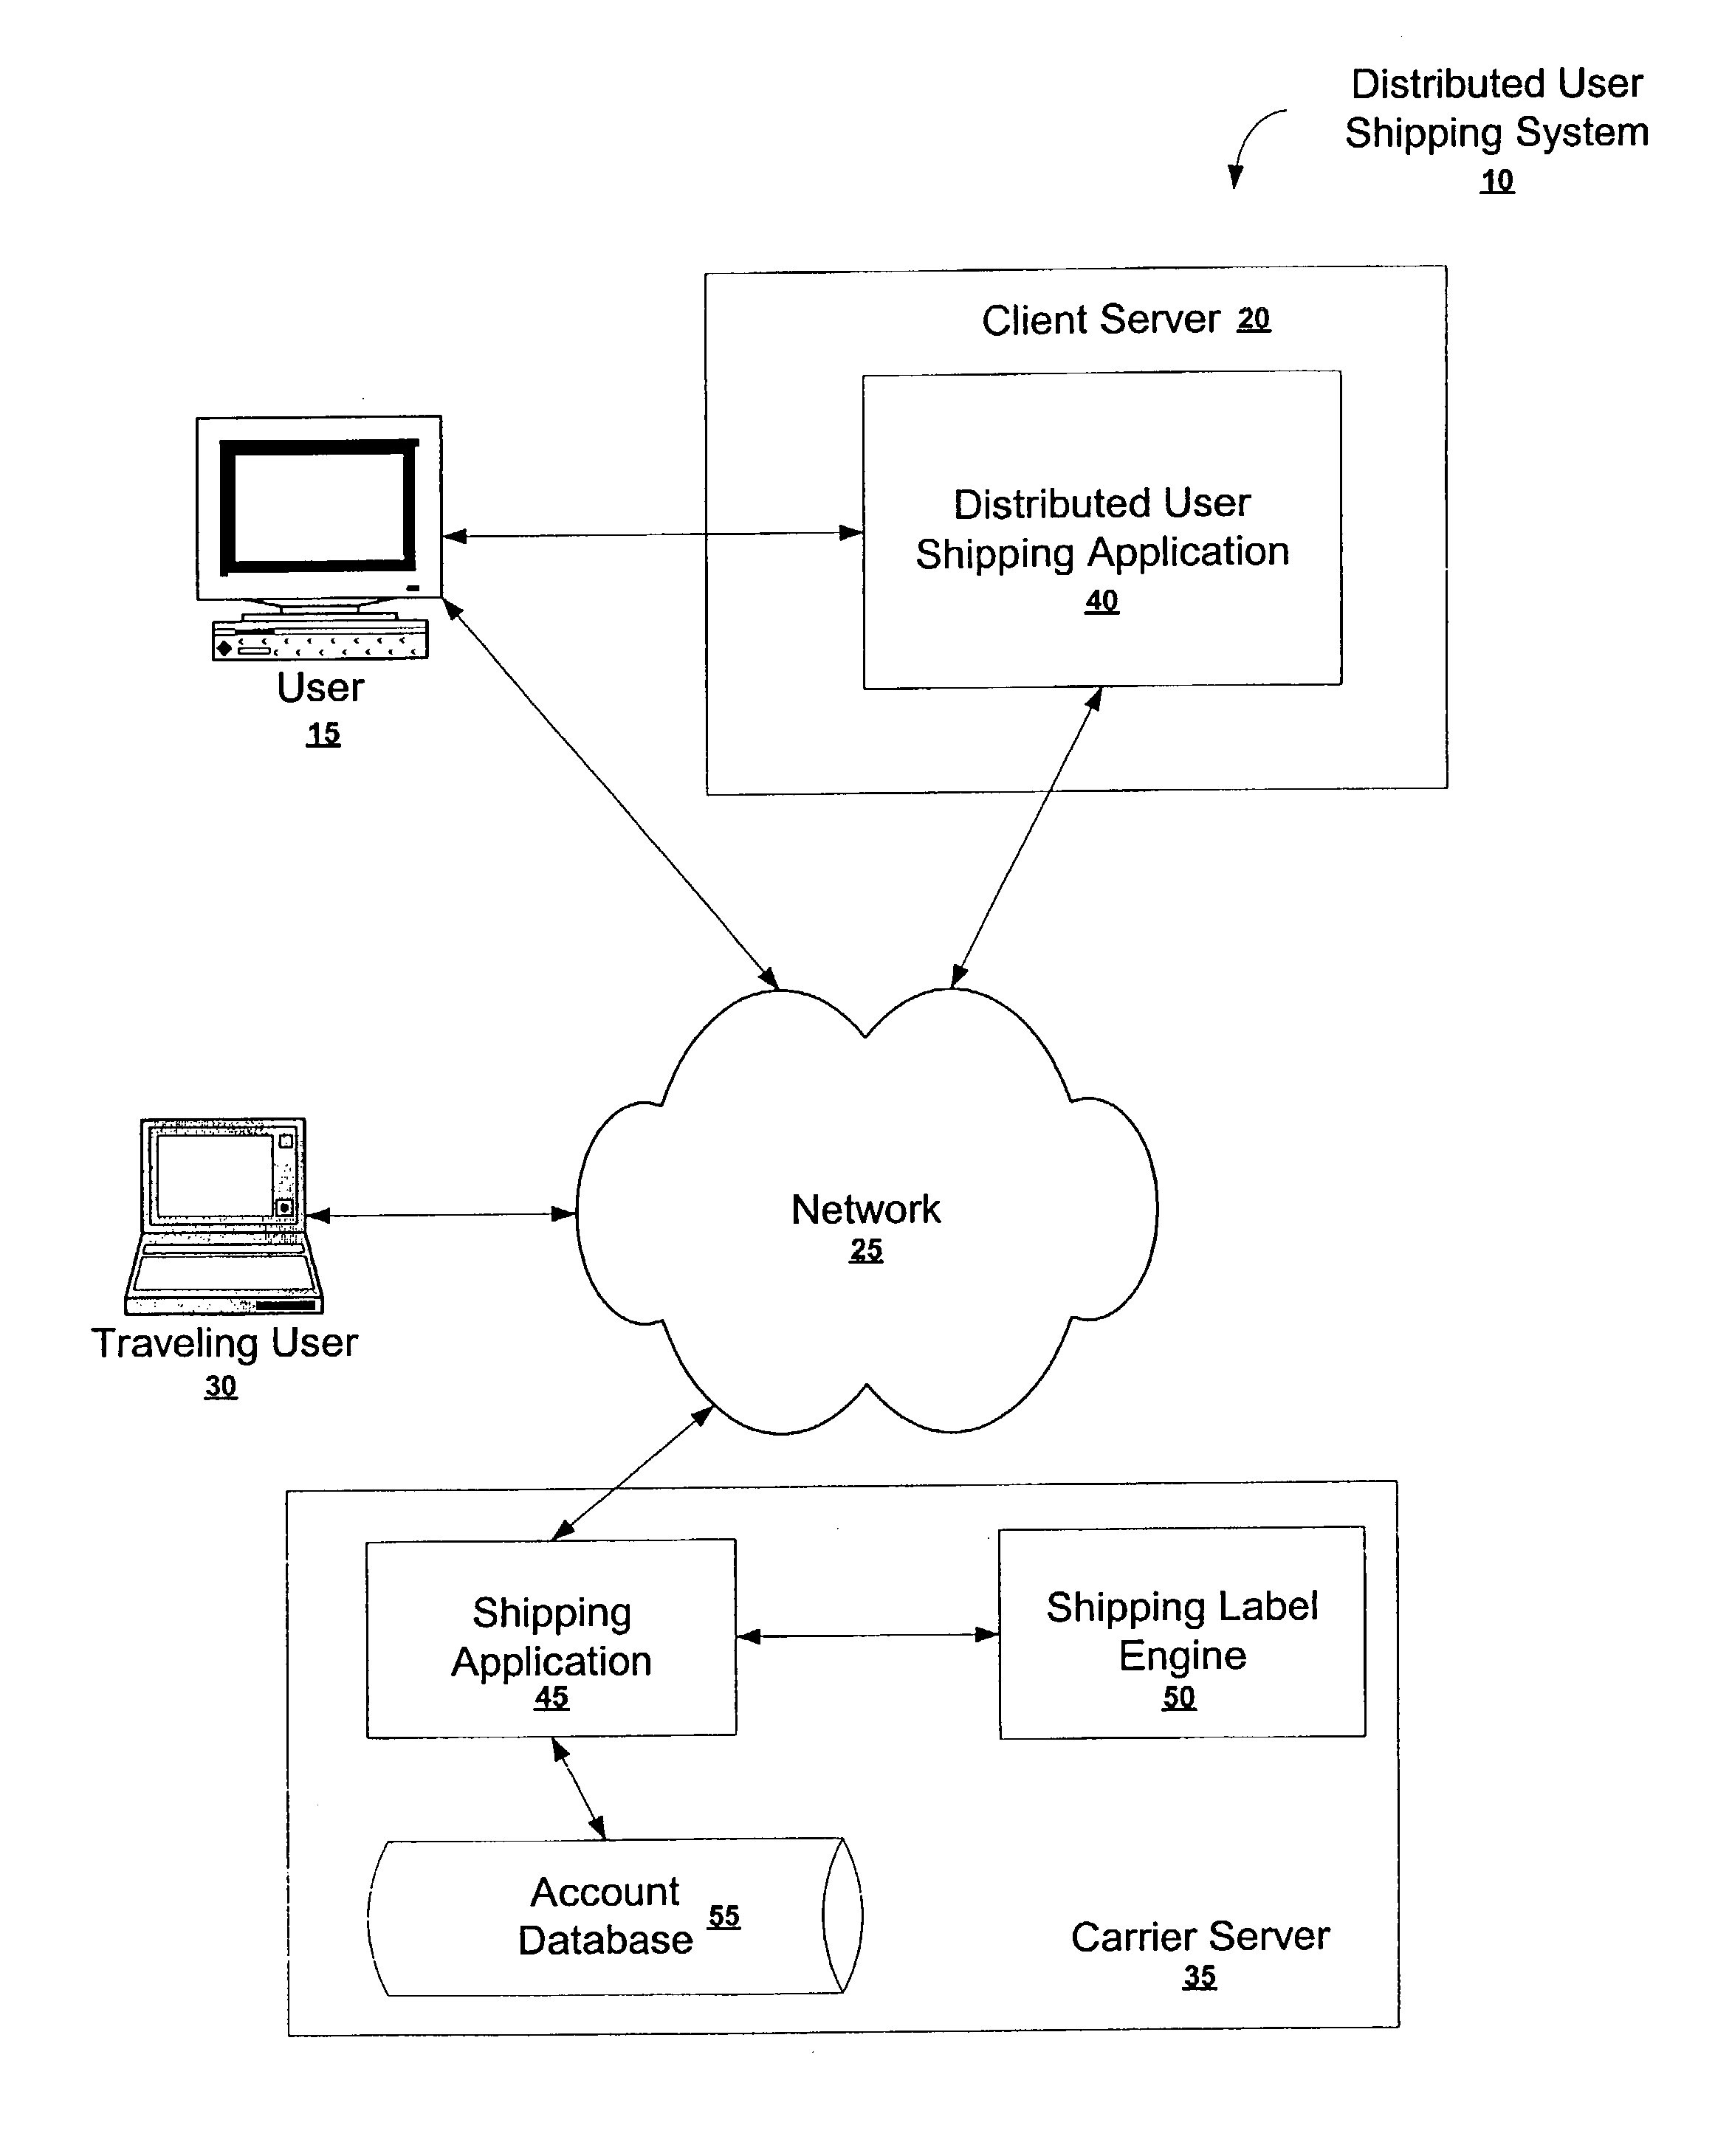 Distributed-user shipping system